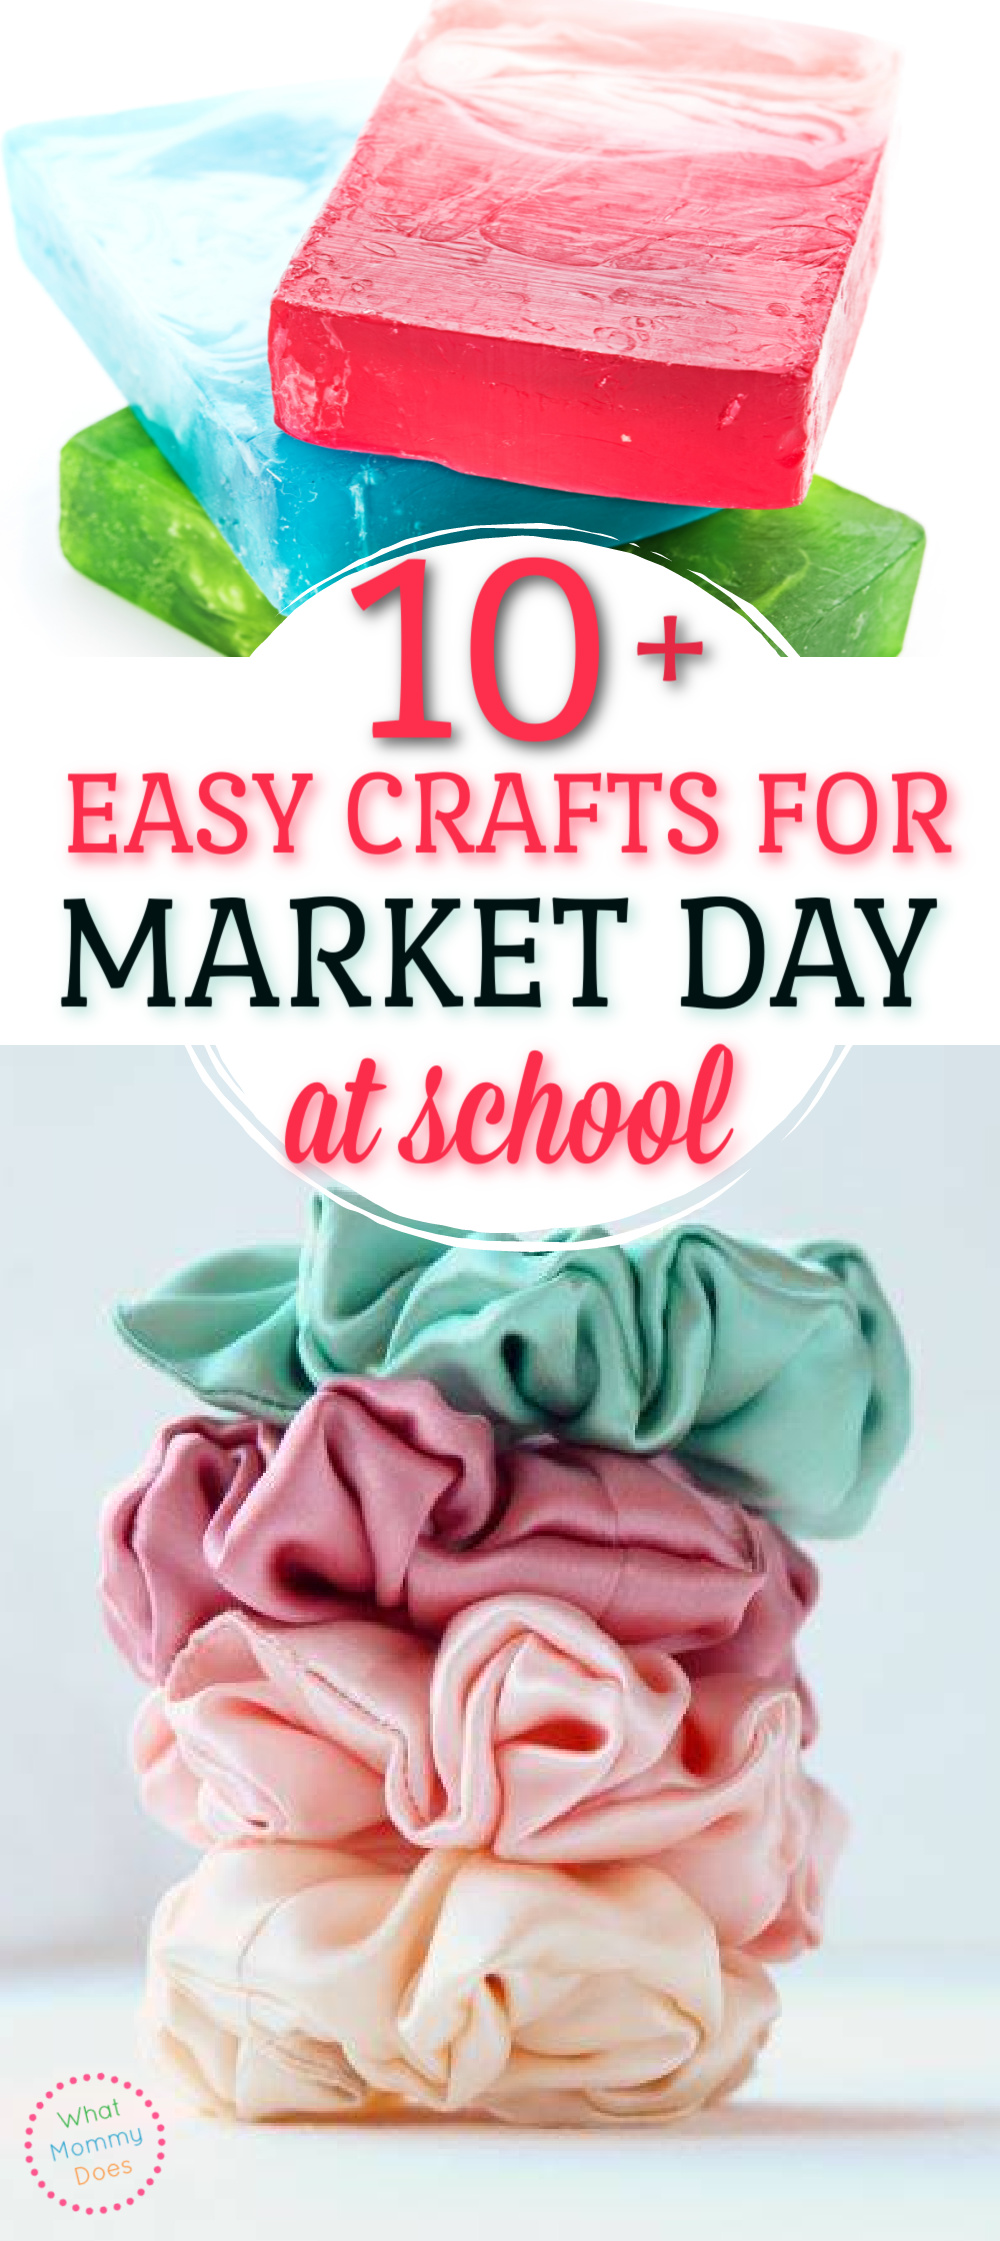 https://www.whatmommydoes.com/wp-content/uploads/2021/05/easy-crafts-for-school-market-day.jpg